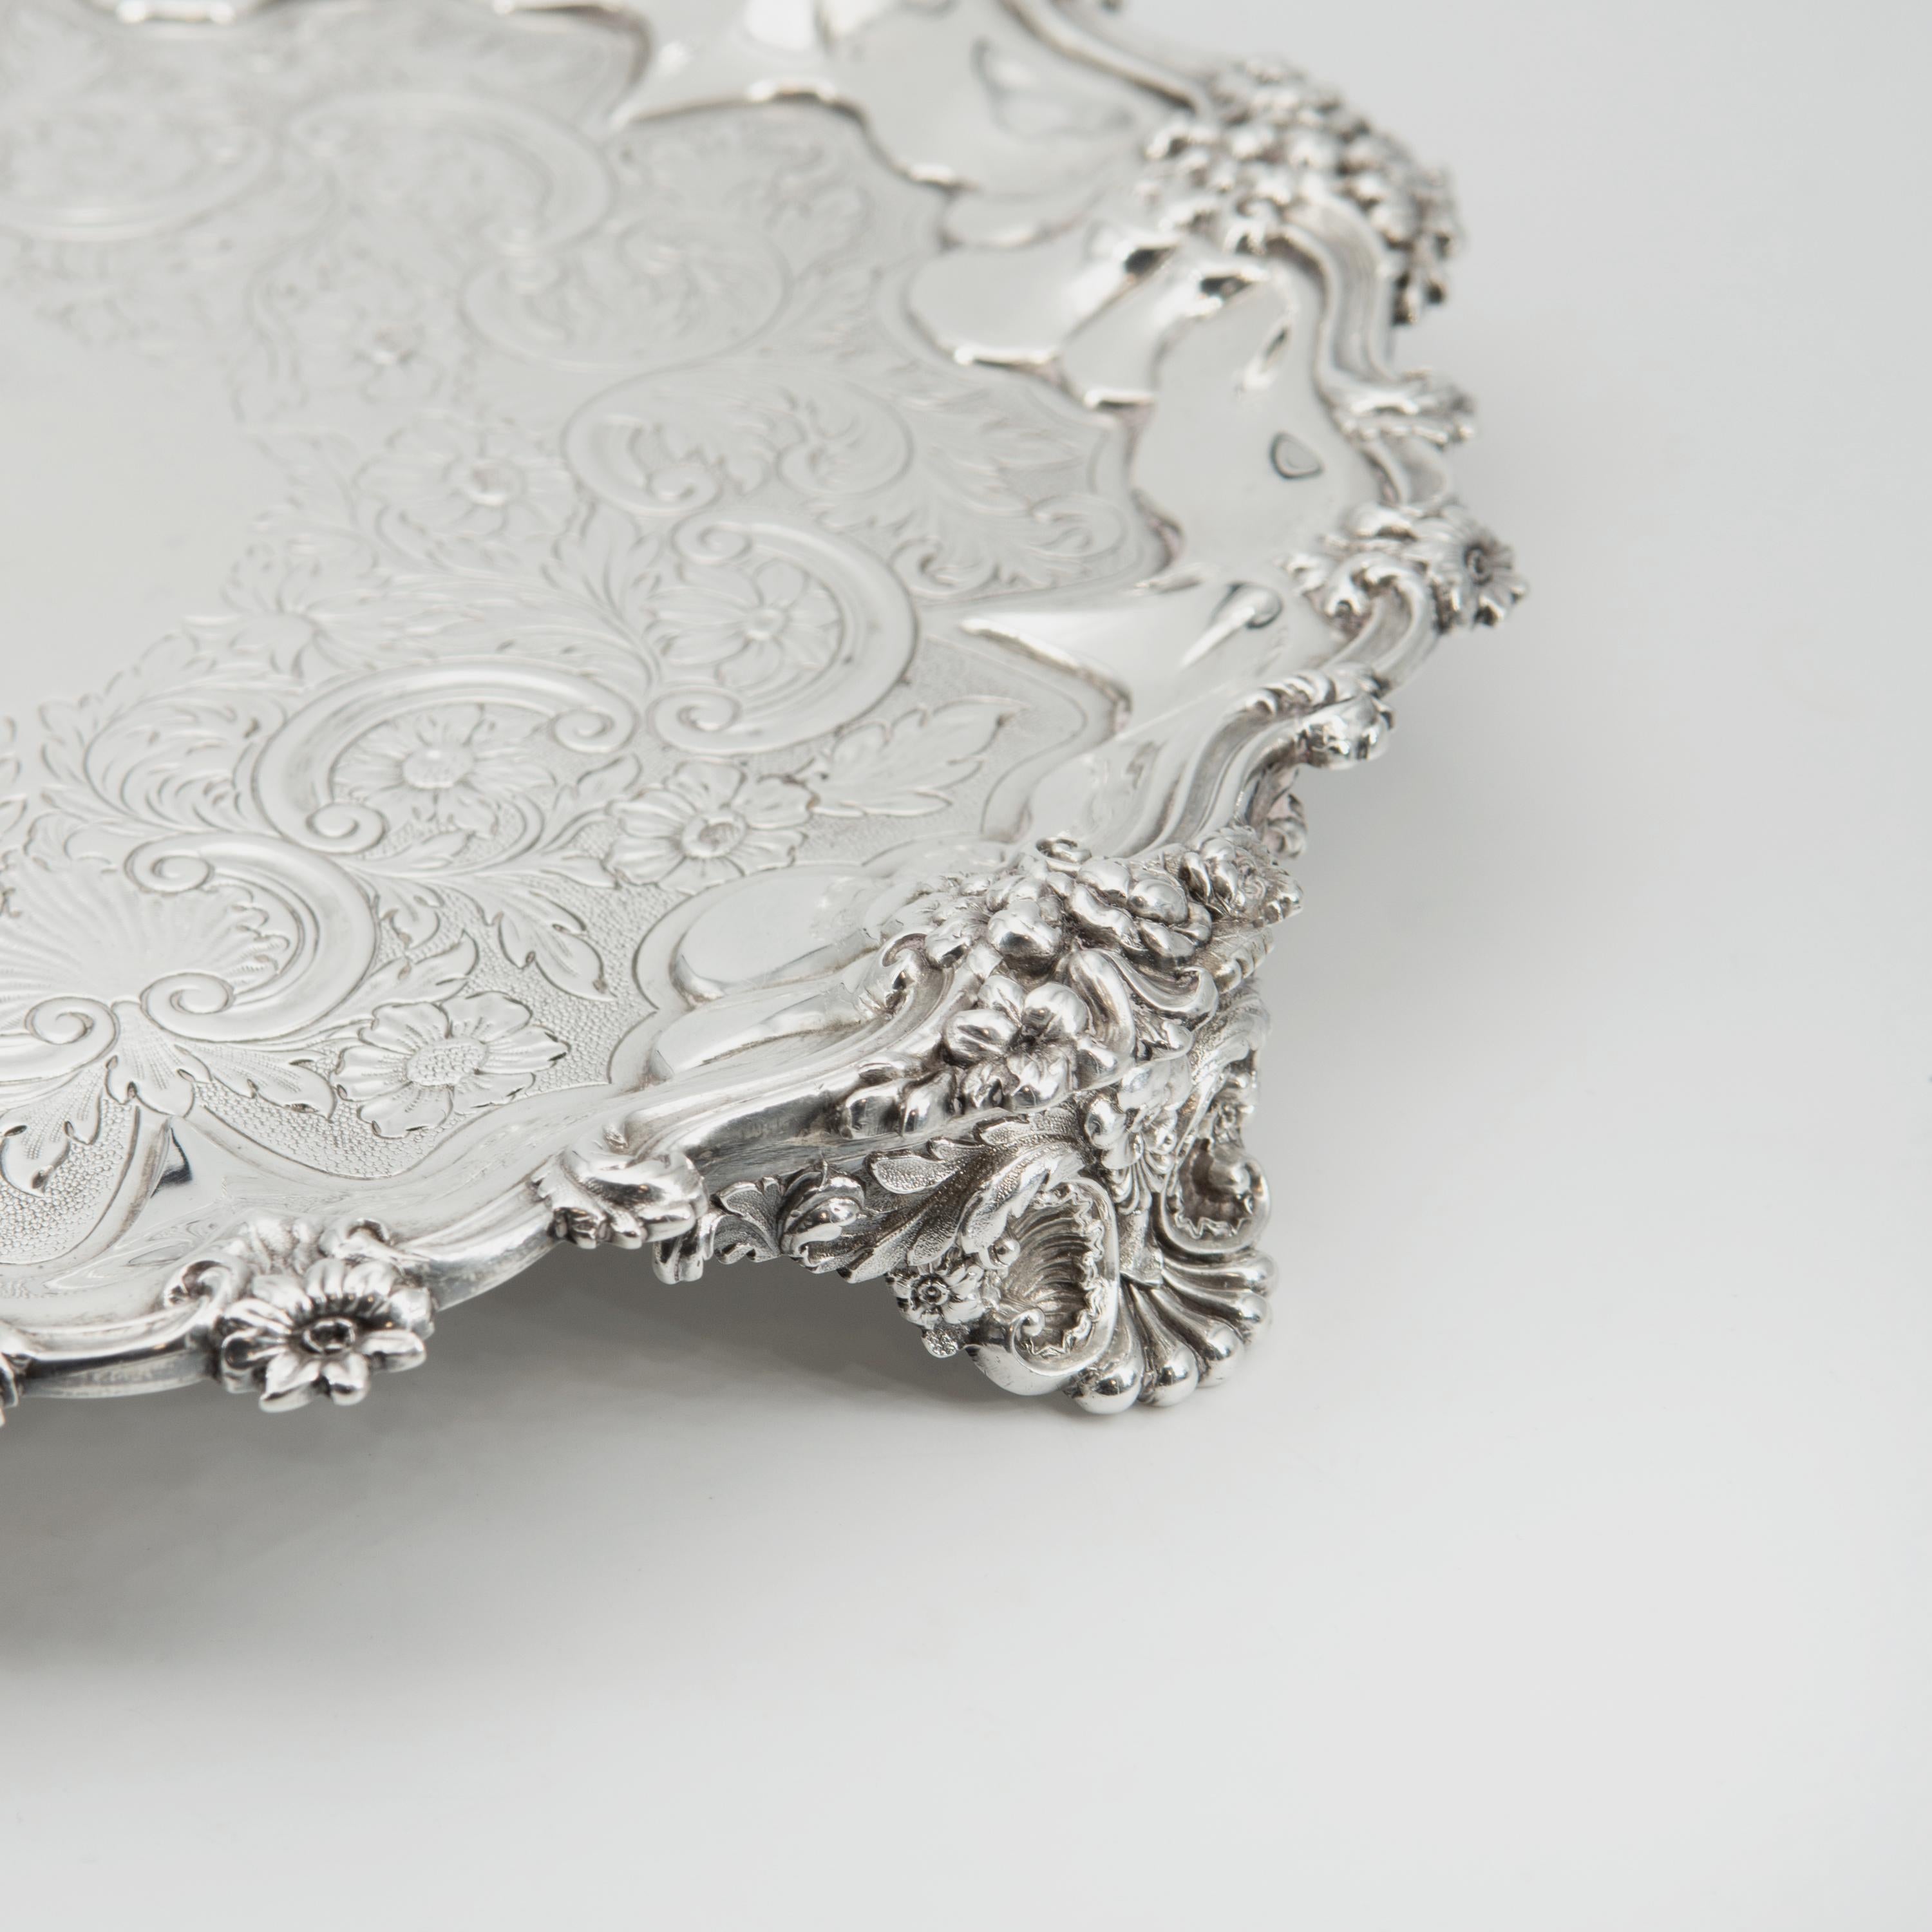 Antique William IV Sterling Silver Flat-Chased Waiter Tray London 1831 In Good Condition For Sale In Norwich, GB